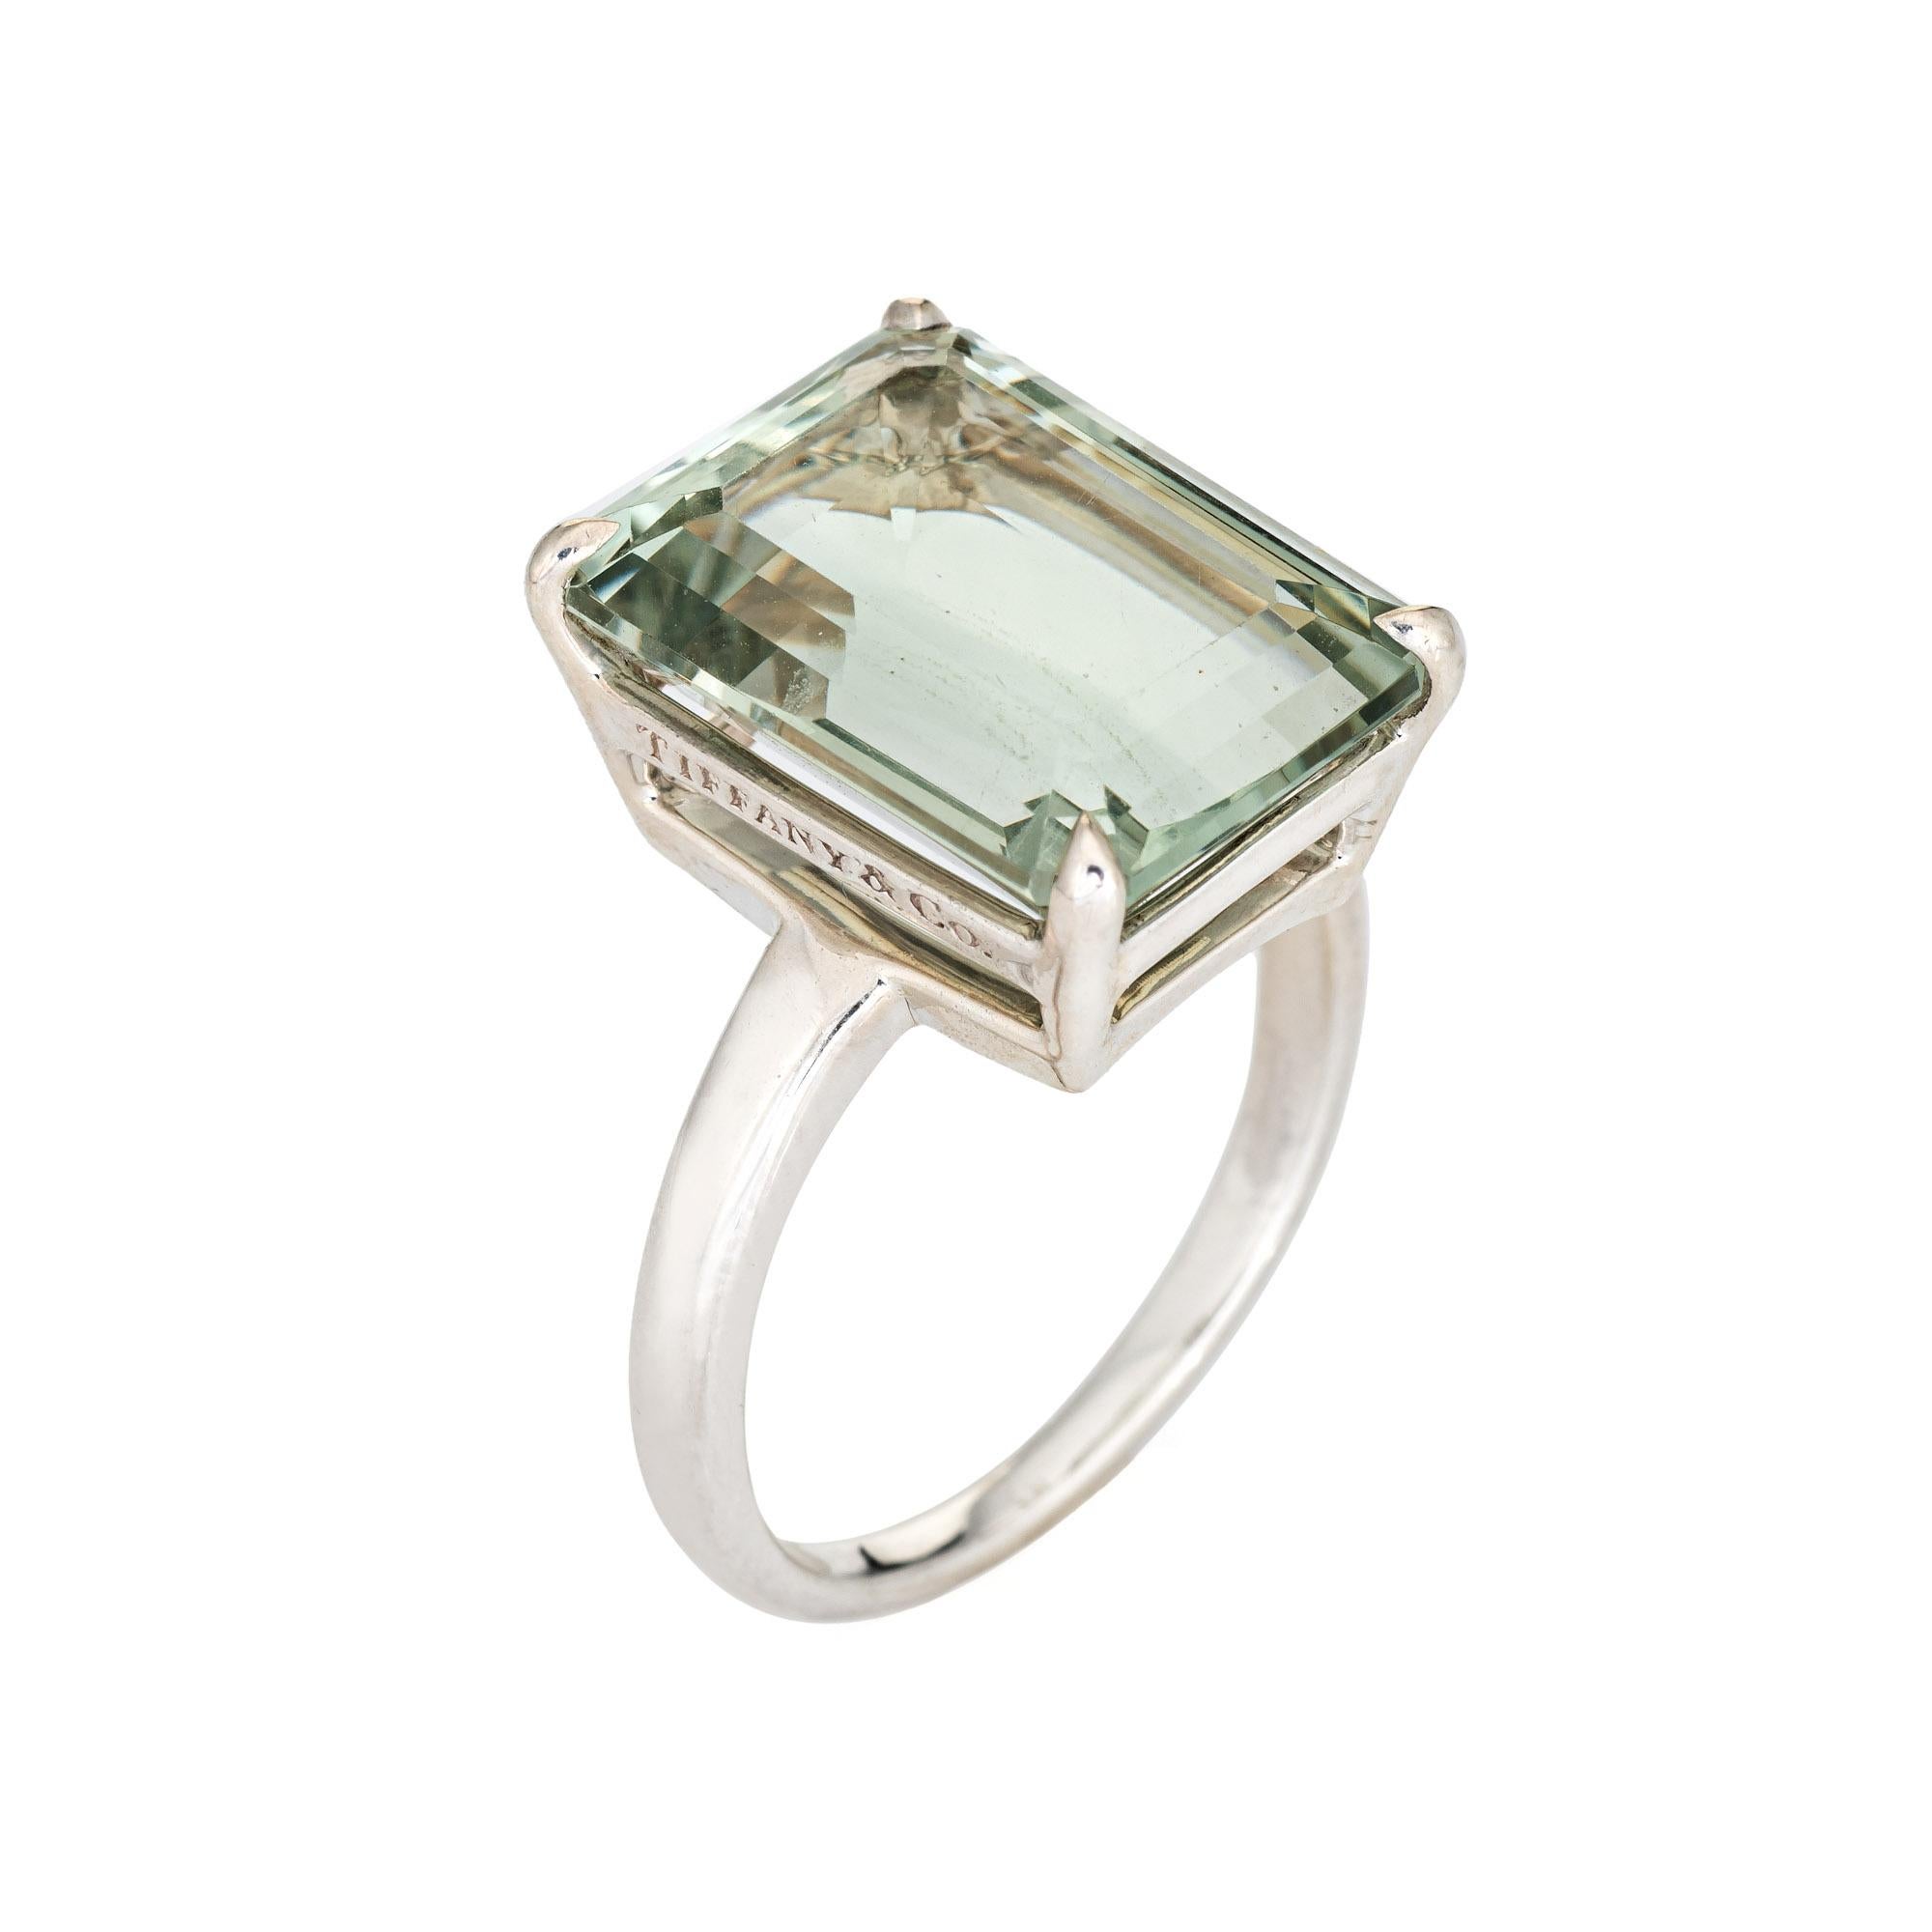 Pre-owned Tiffany & Co green amethyst ring, crafted in sterling silver.  

Emerald cut green amethyst measures 16mm x 12mm (estimated at 10 carats). The quartz is in very good condition and free of cracks or chips. 

The retired ring is from the